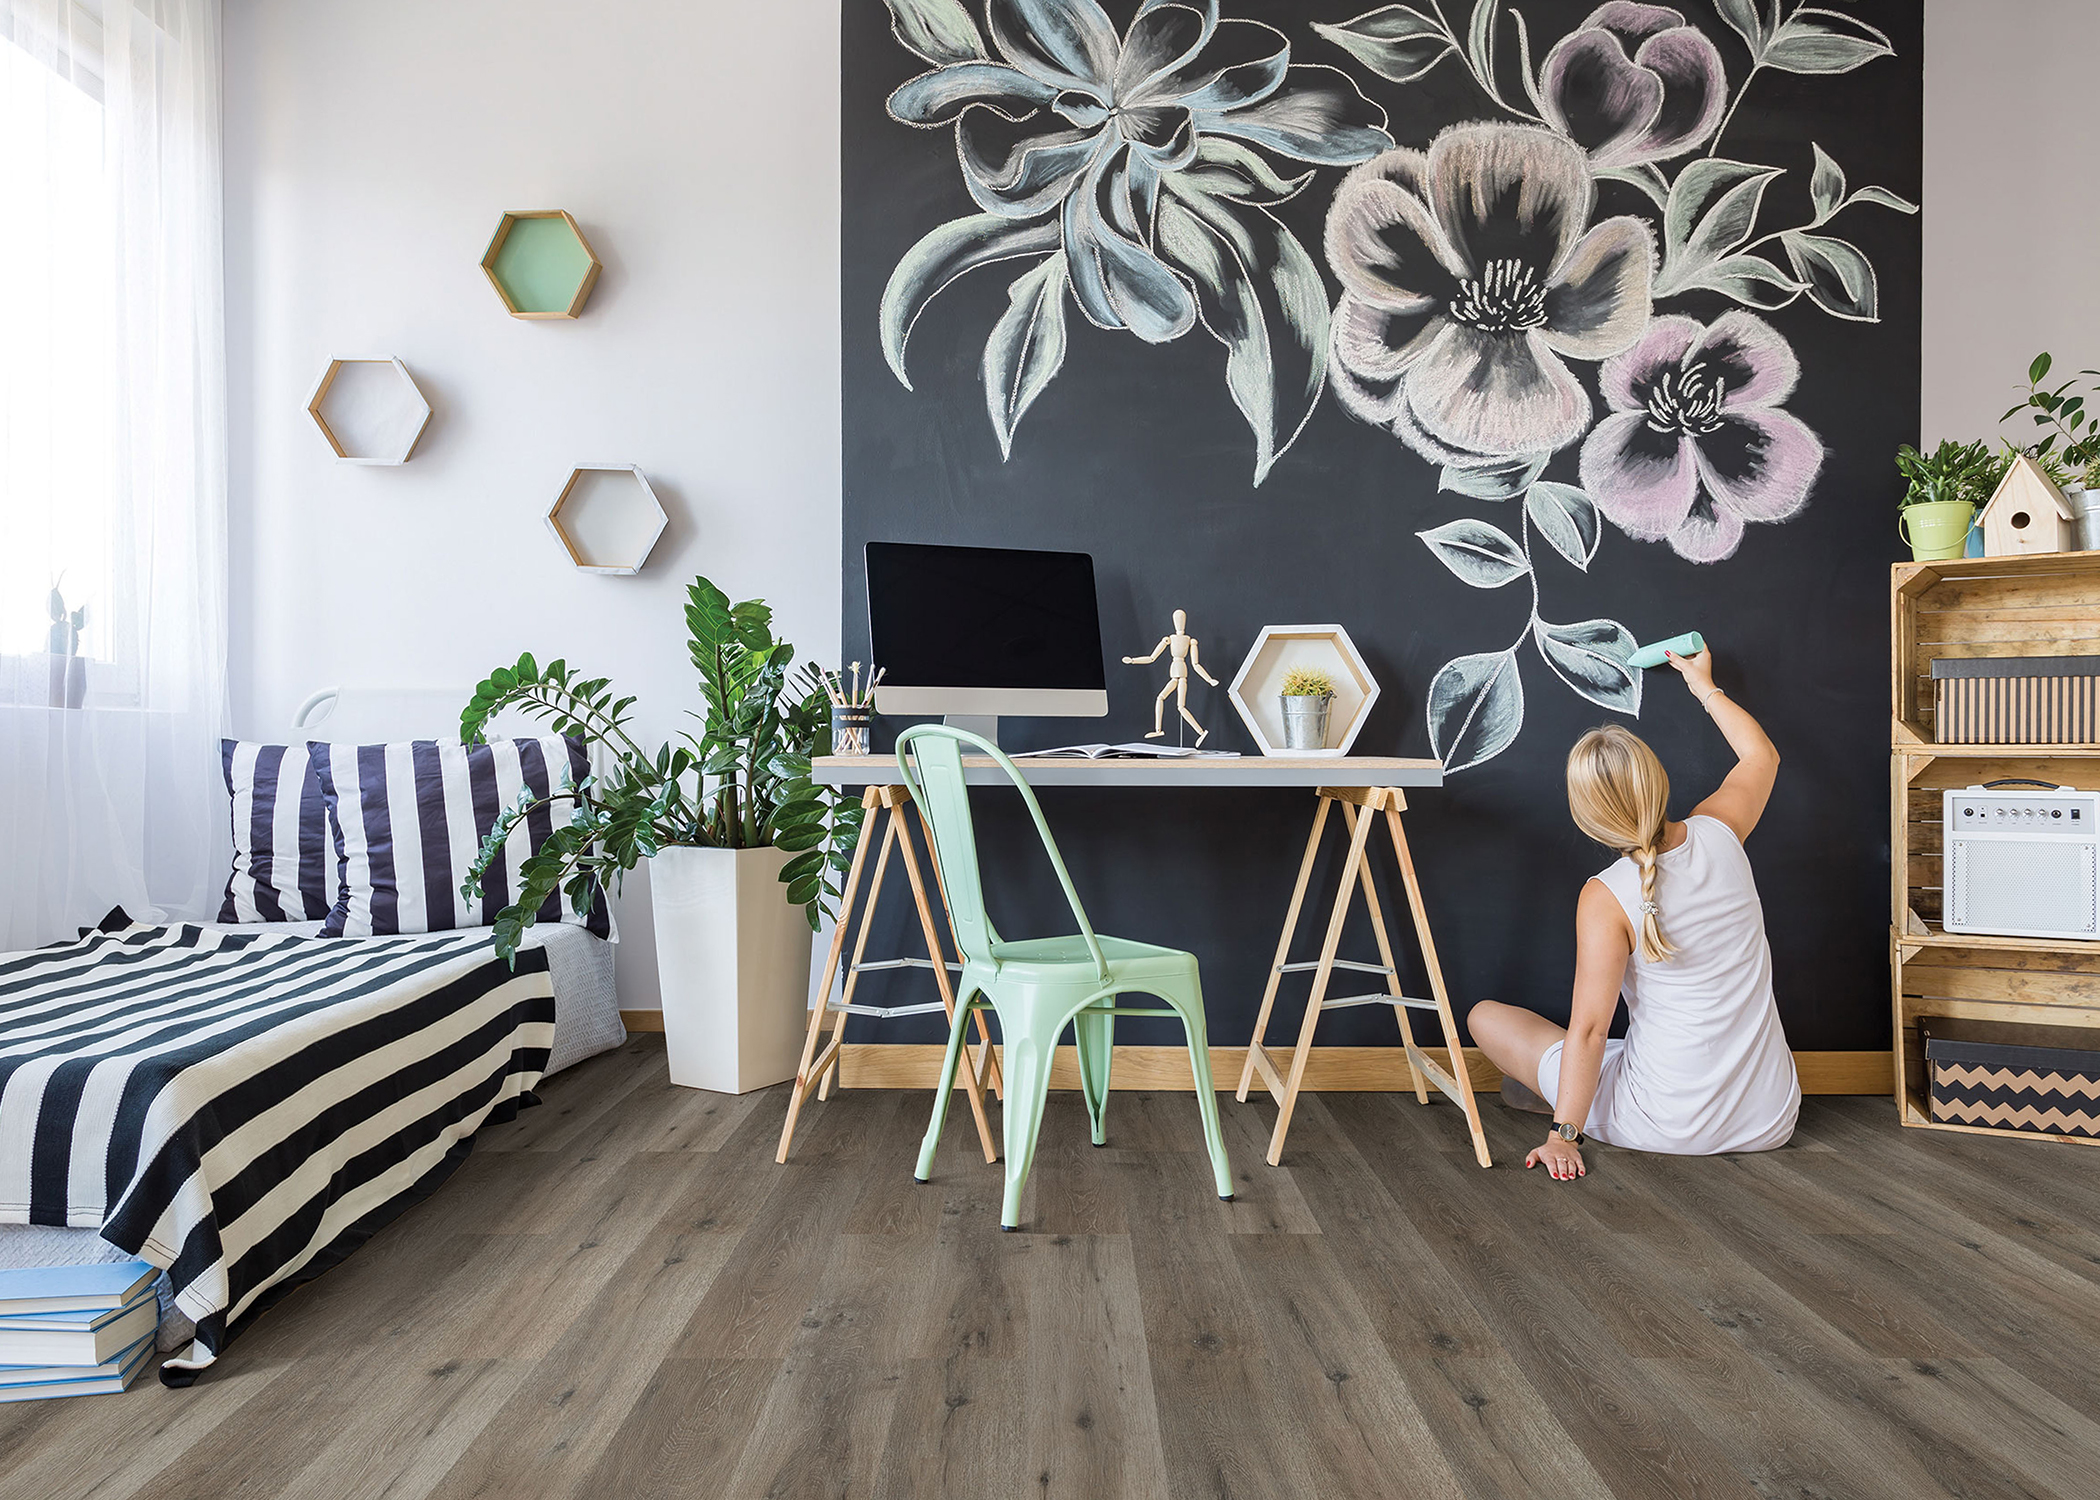 a girl draws flowers on the wall with wood look cork flooring in the bedroom